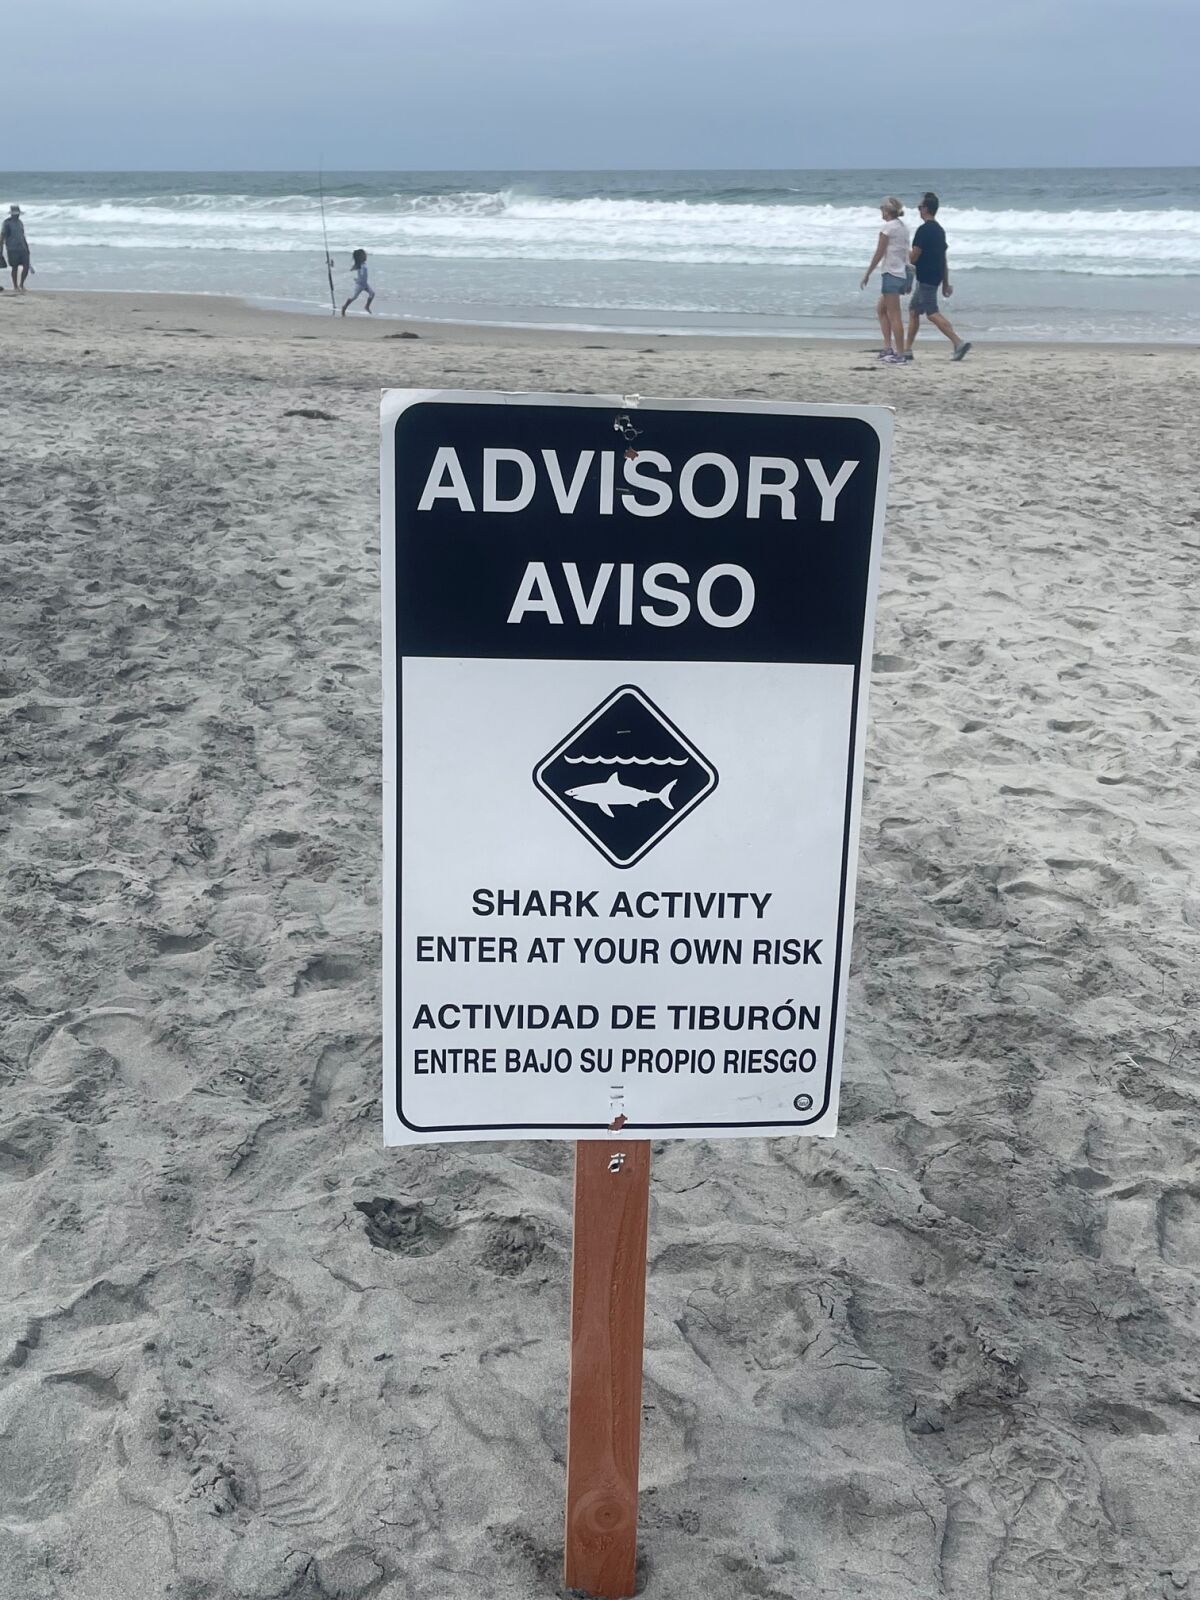 Kurt Hoffman writes that this shark advisory sign was posted Aug. 20 at Torrey Pines State Beach.